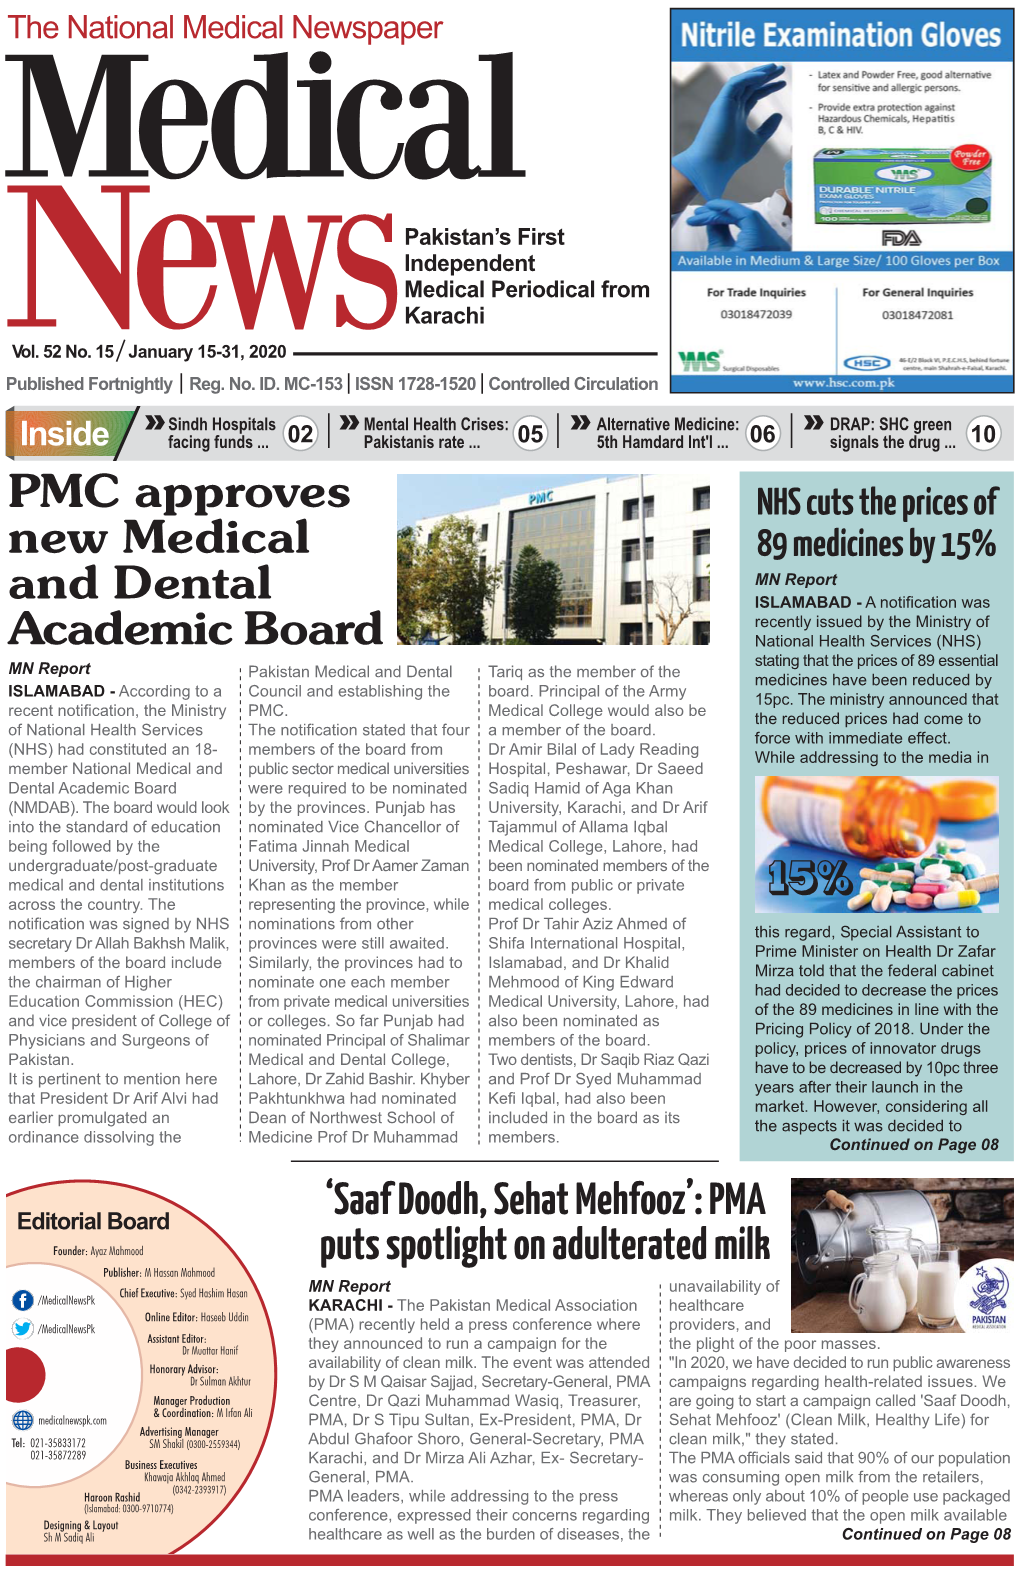 PMC Approves New Medical and Dental Academic Board